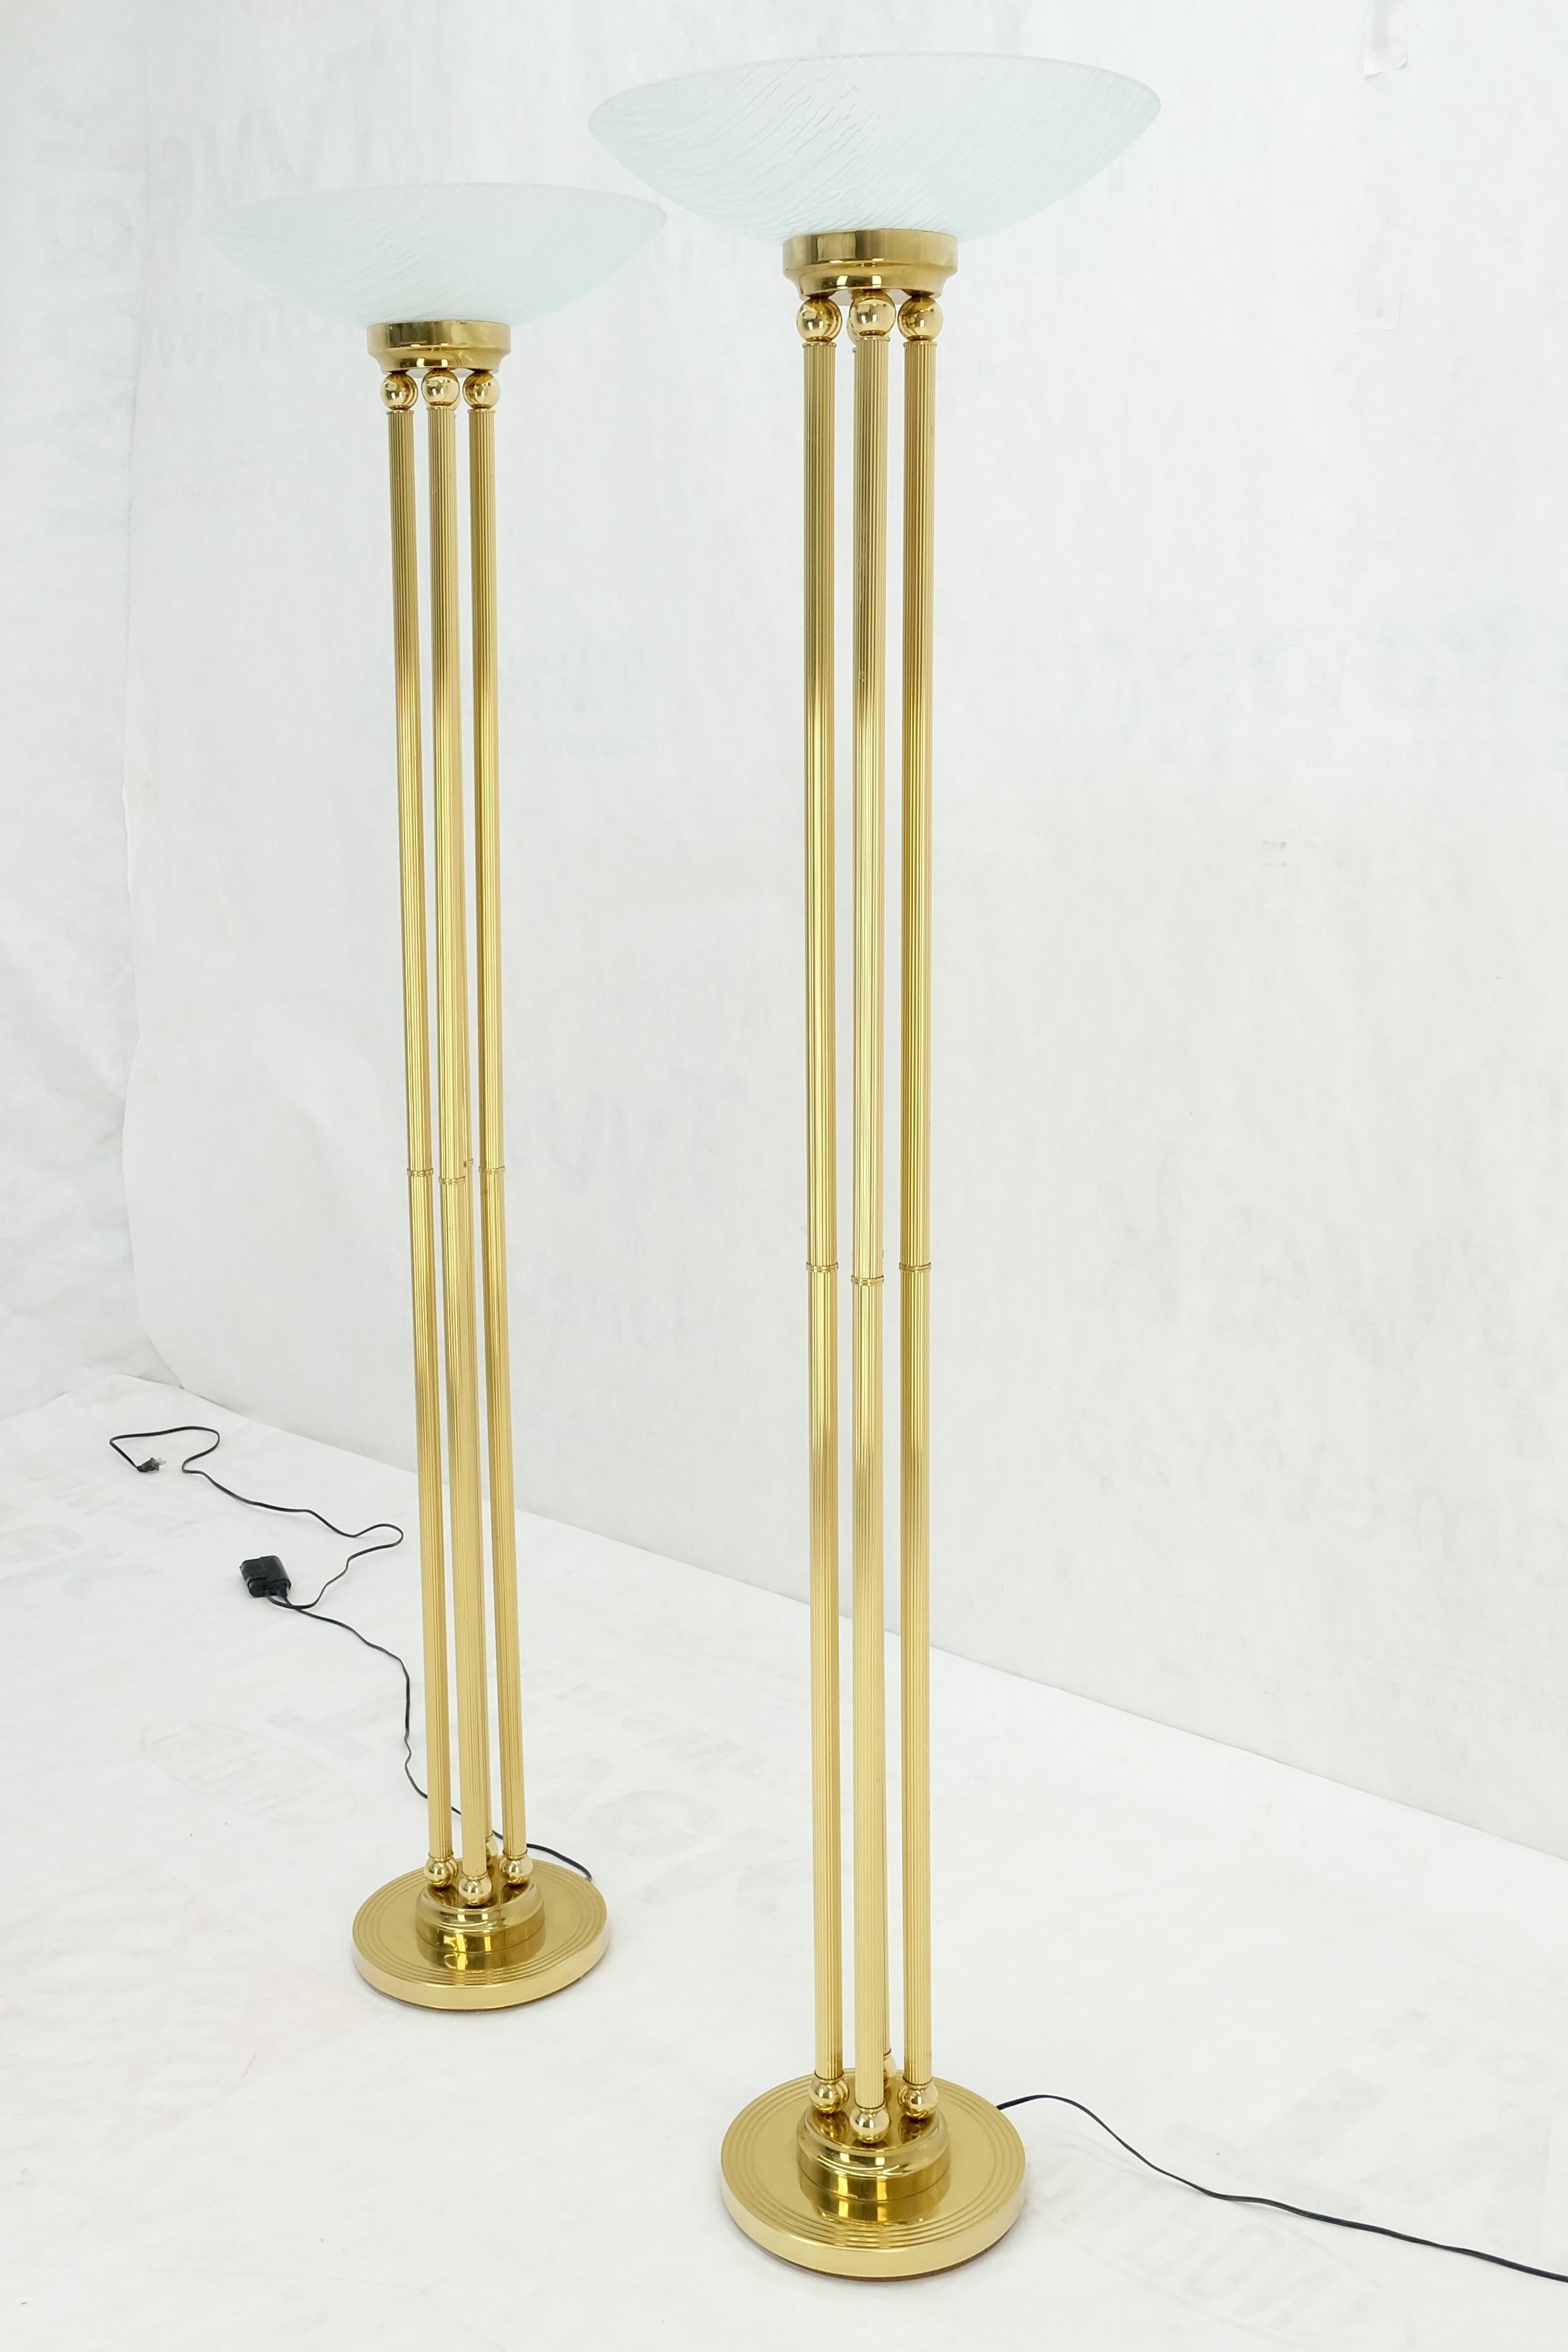 Pair of Mid Century Modern Brass Etched Glass Shades Torcheres Floor Lamps MINT! For Sale 2